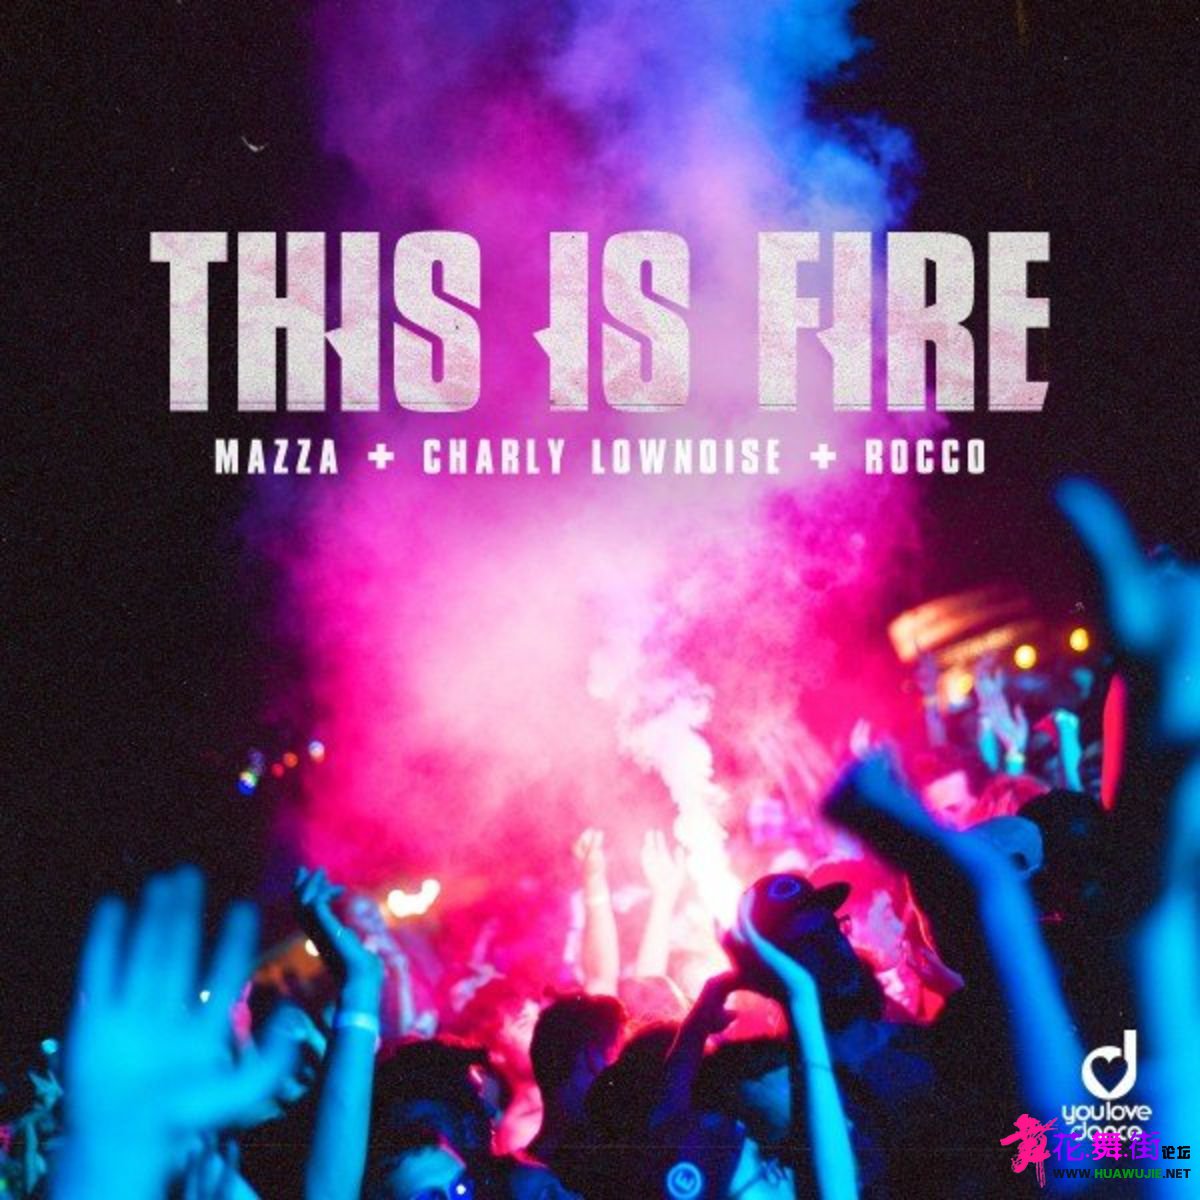 00-mazza_x_charly_lownoise_x_rocco-this_is_fire-cover-2021_int.jpg